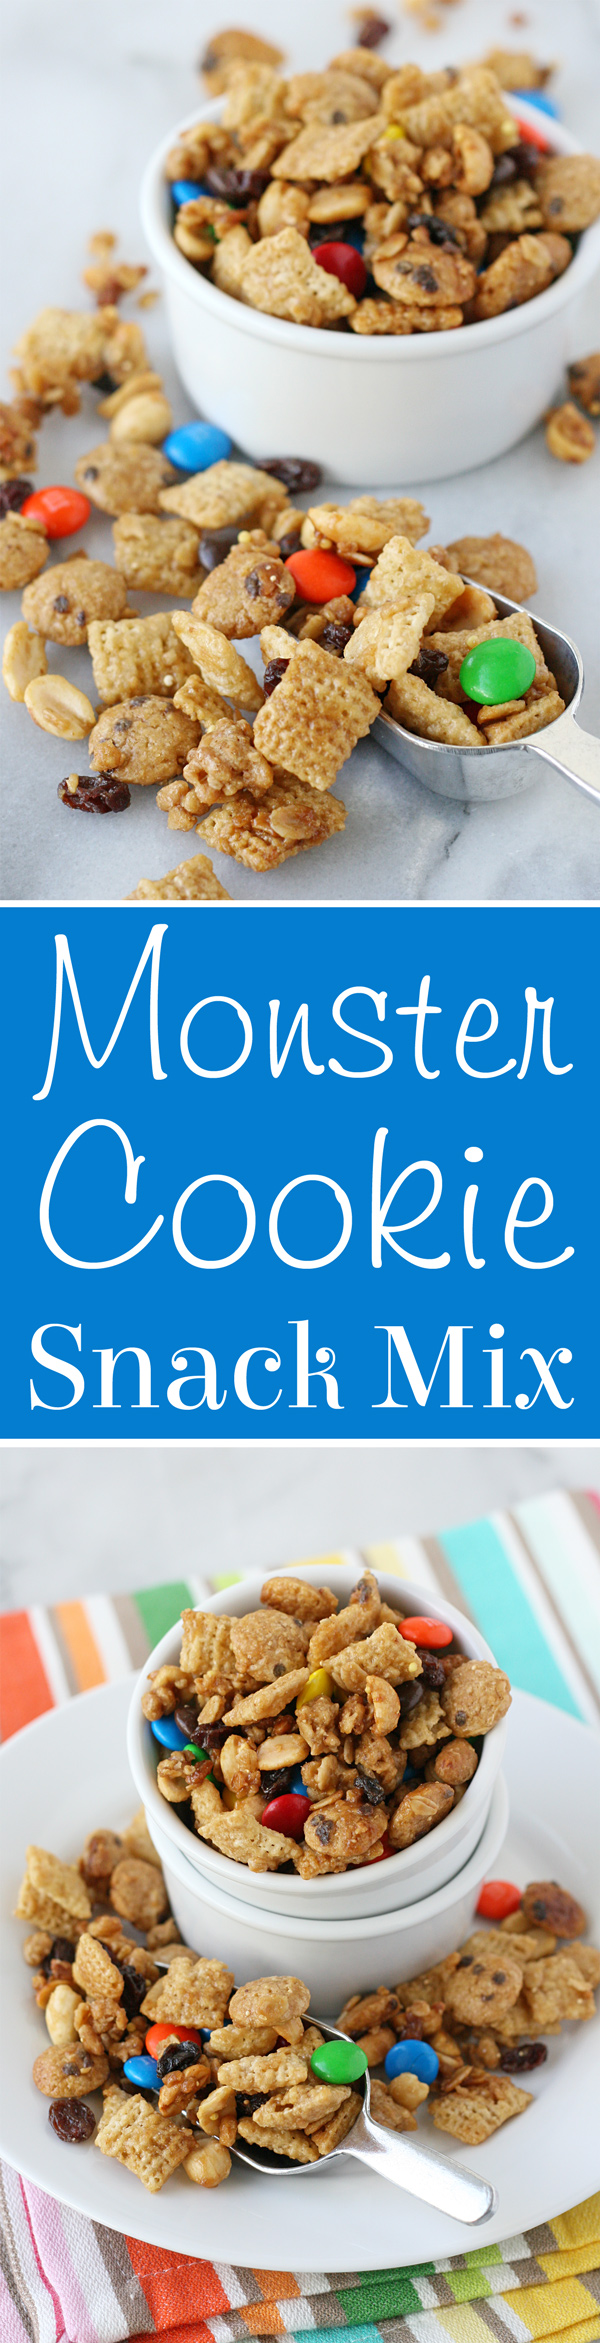 Crazy delicious!! Sweet, salty, crunchy and amazing MONSTER COOKIE SNACK MIX!